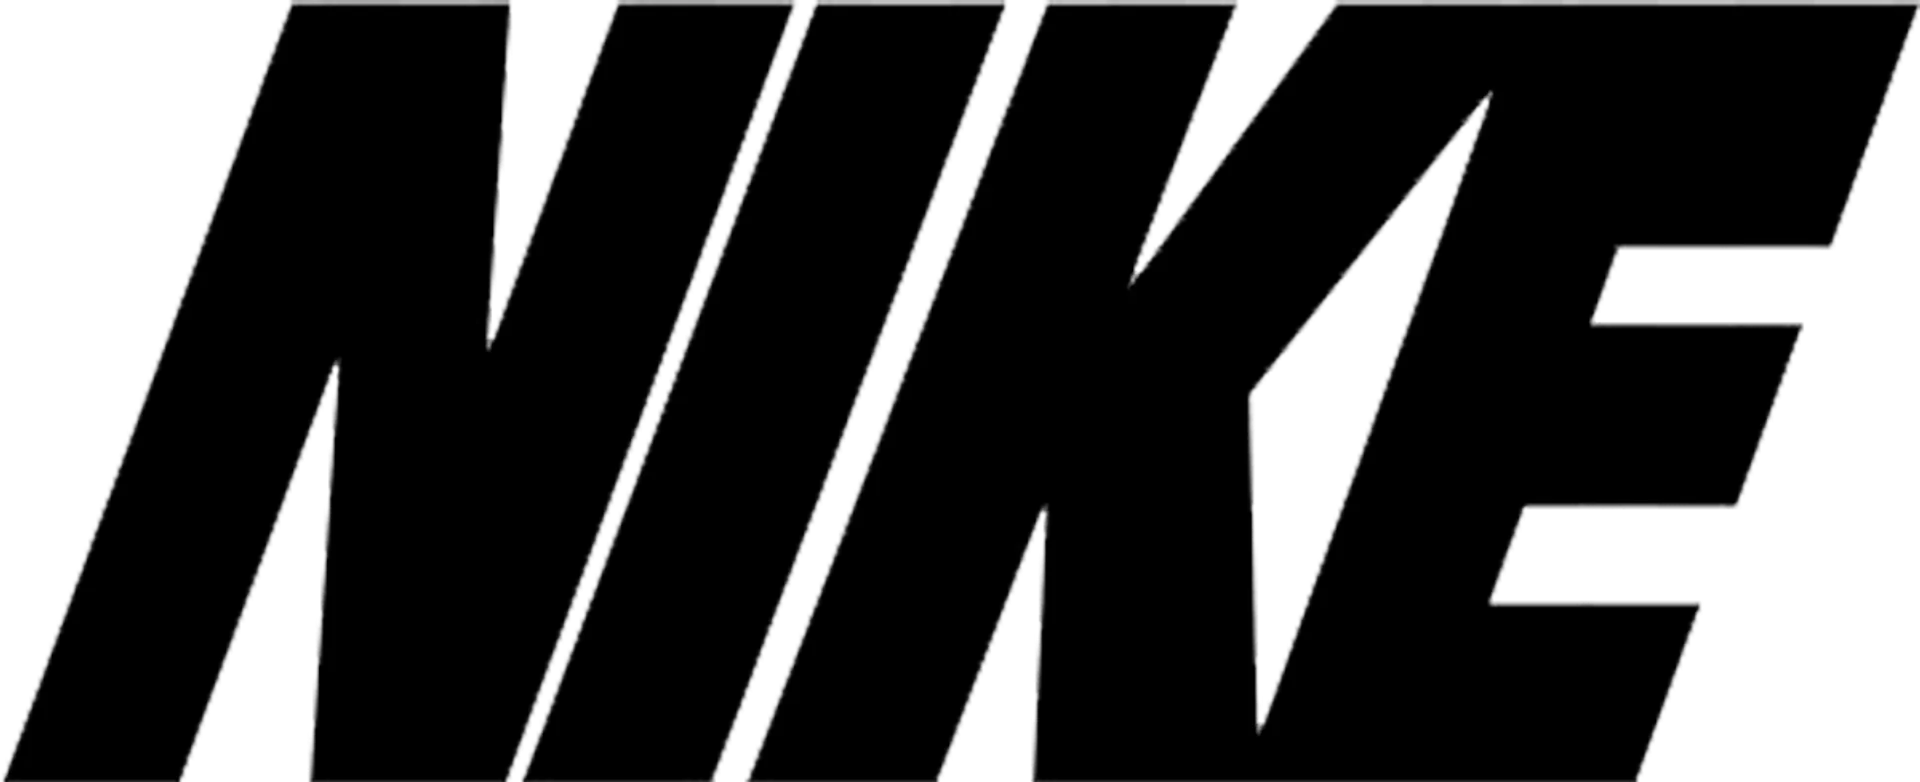 NIKE logo of current catalogue